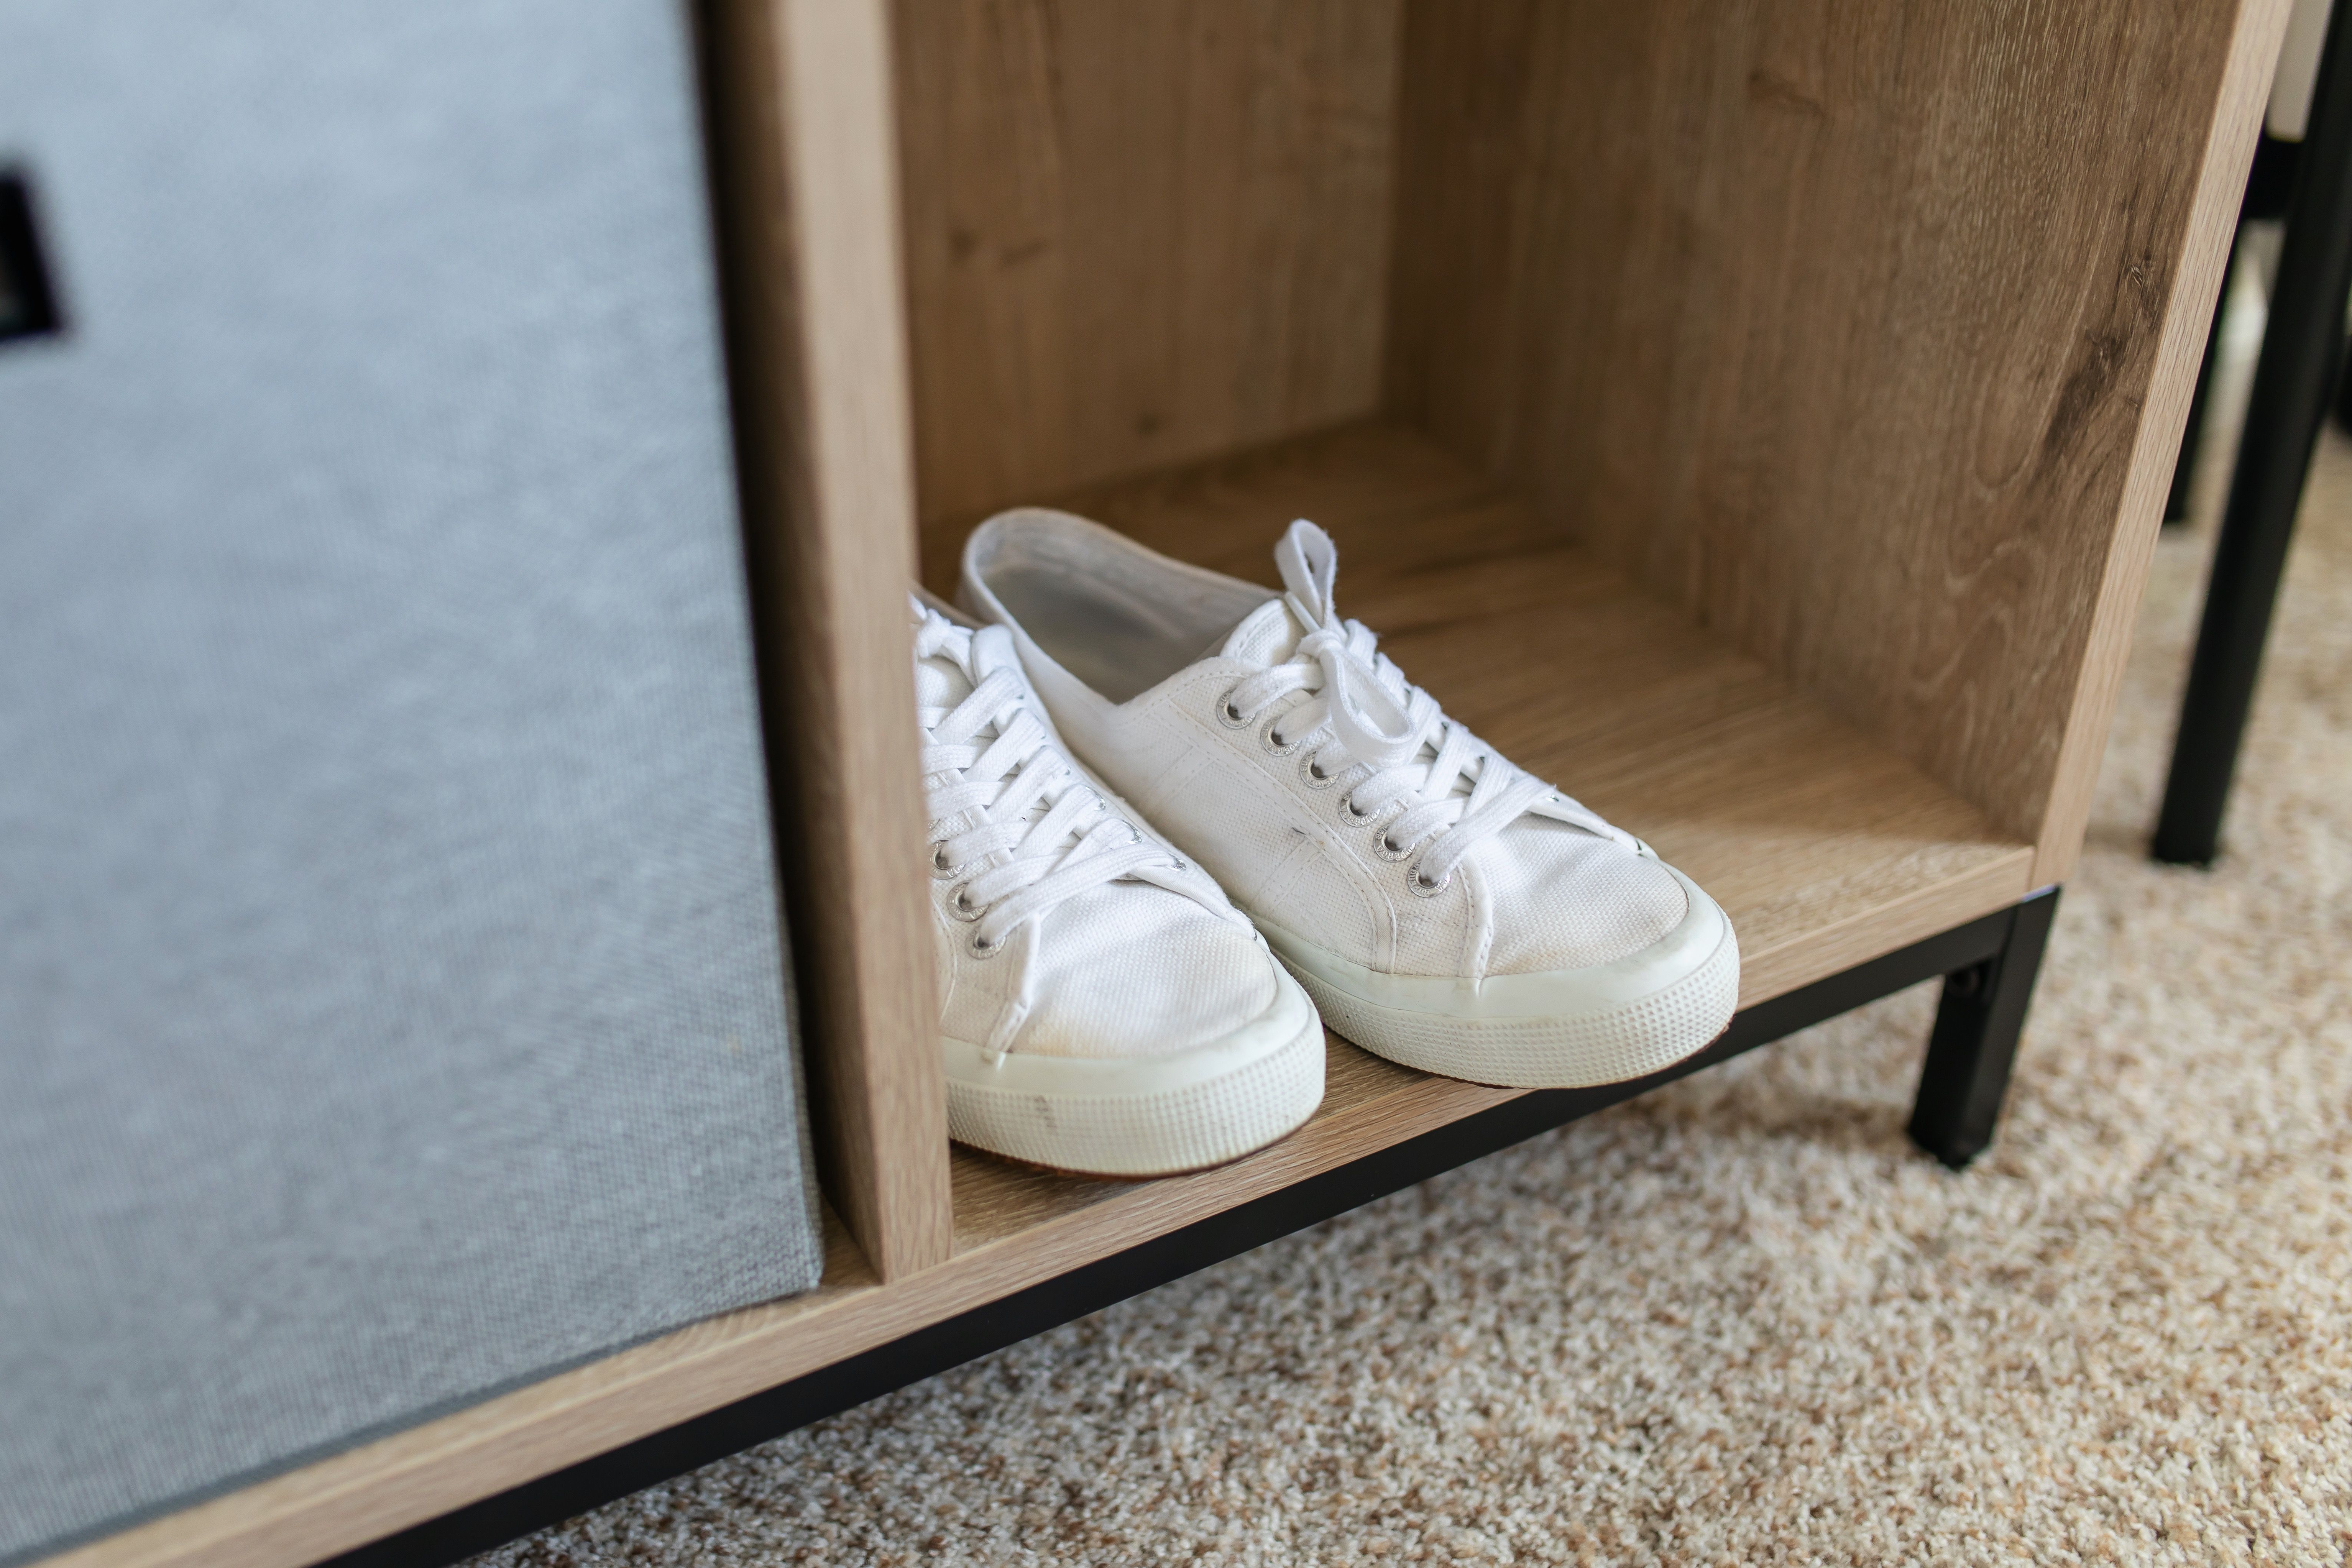 The Cheap Fix for Removing Odors From Shoes